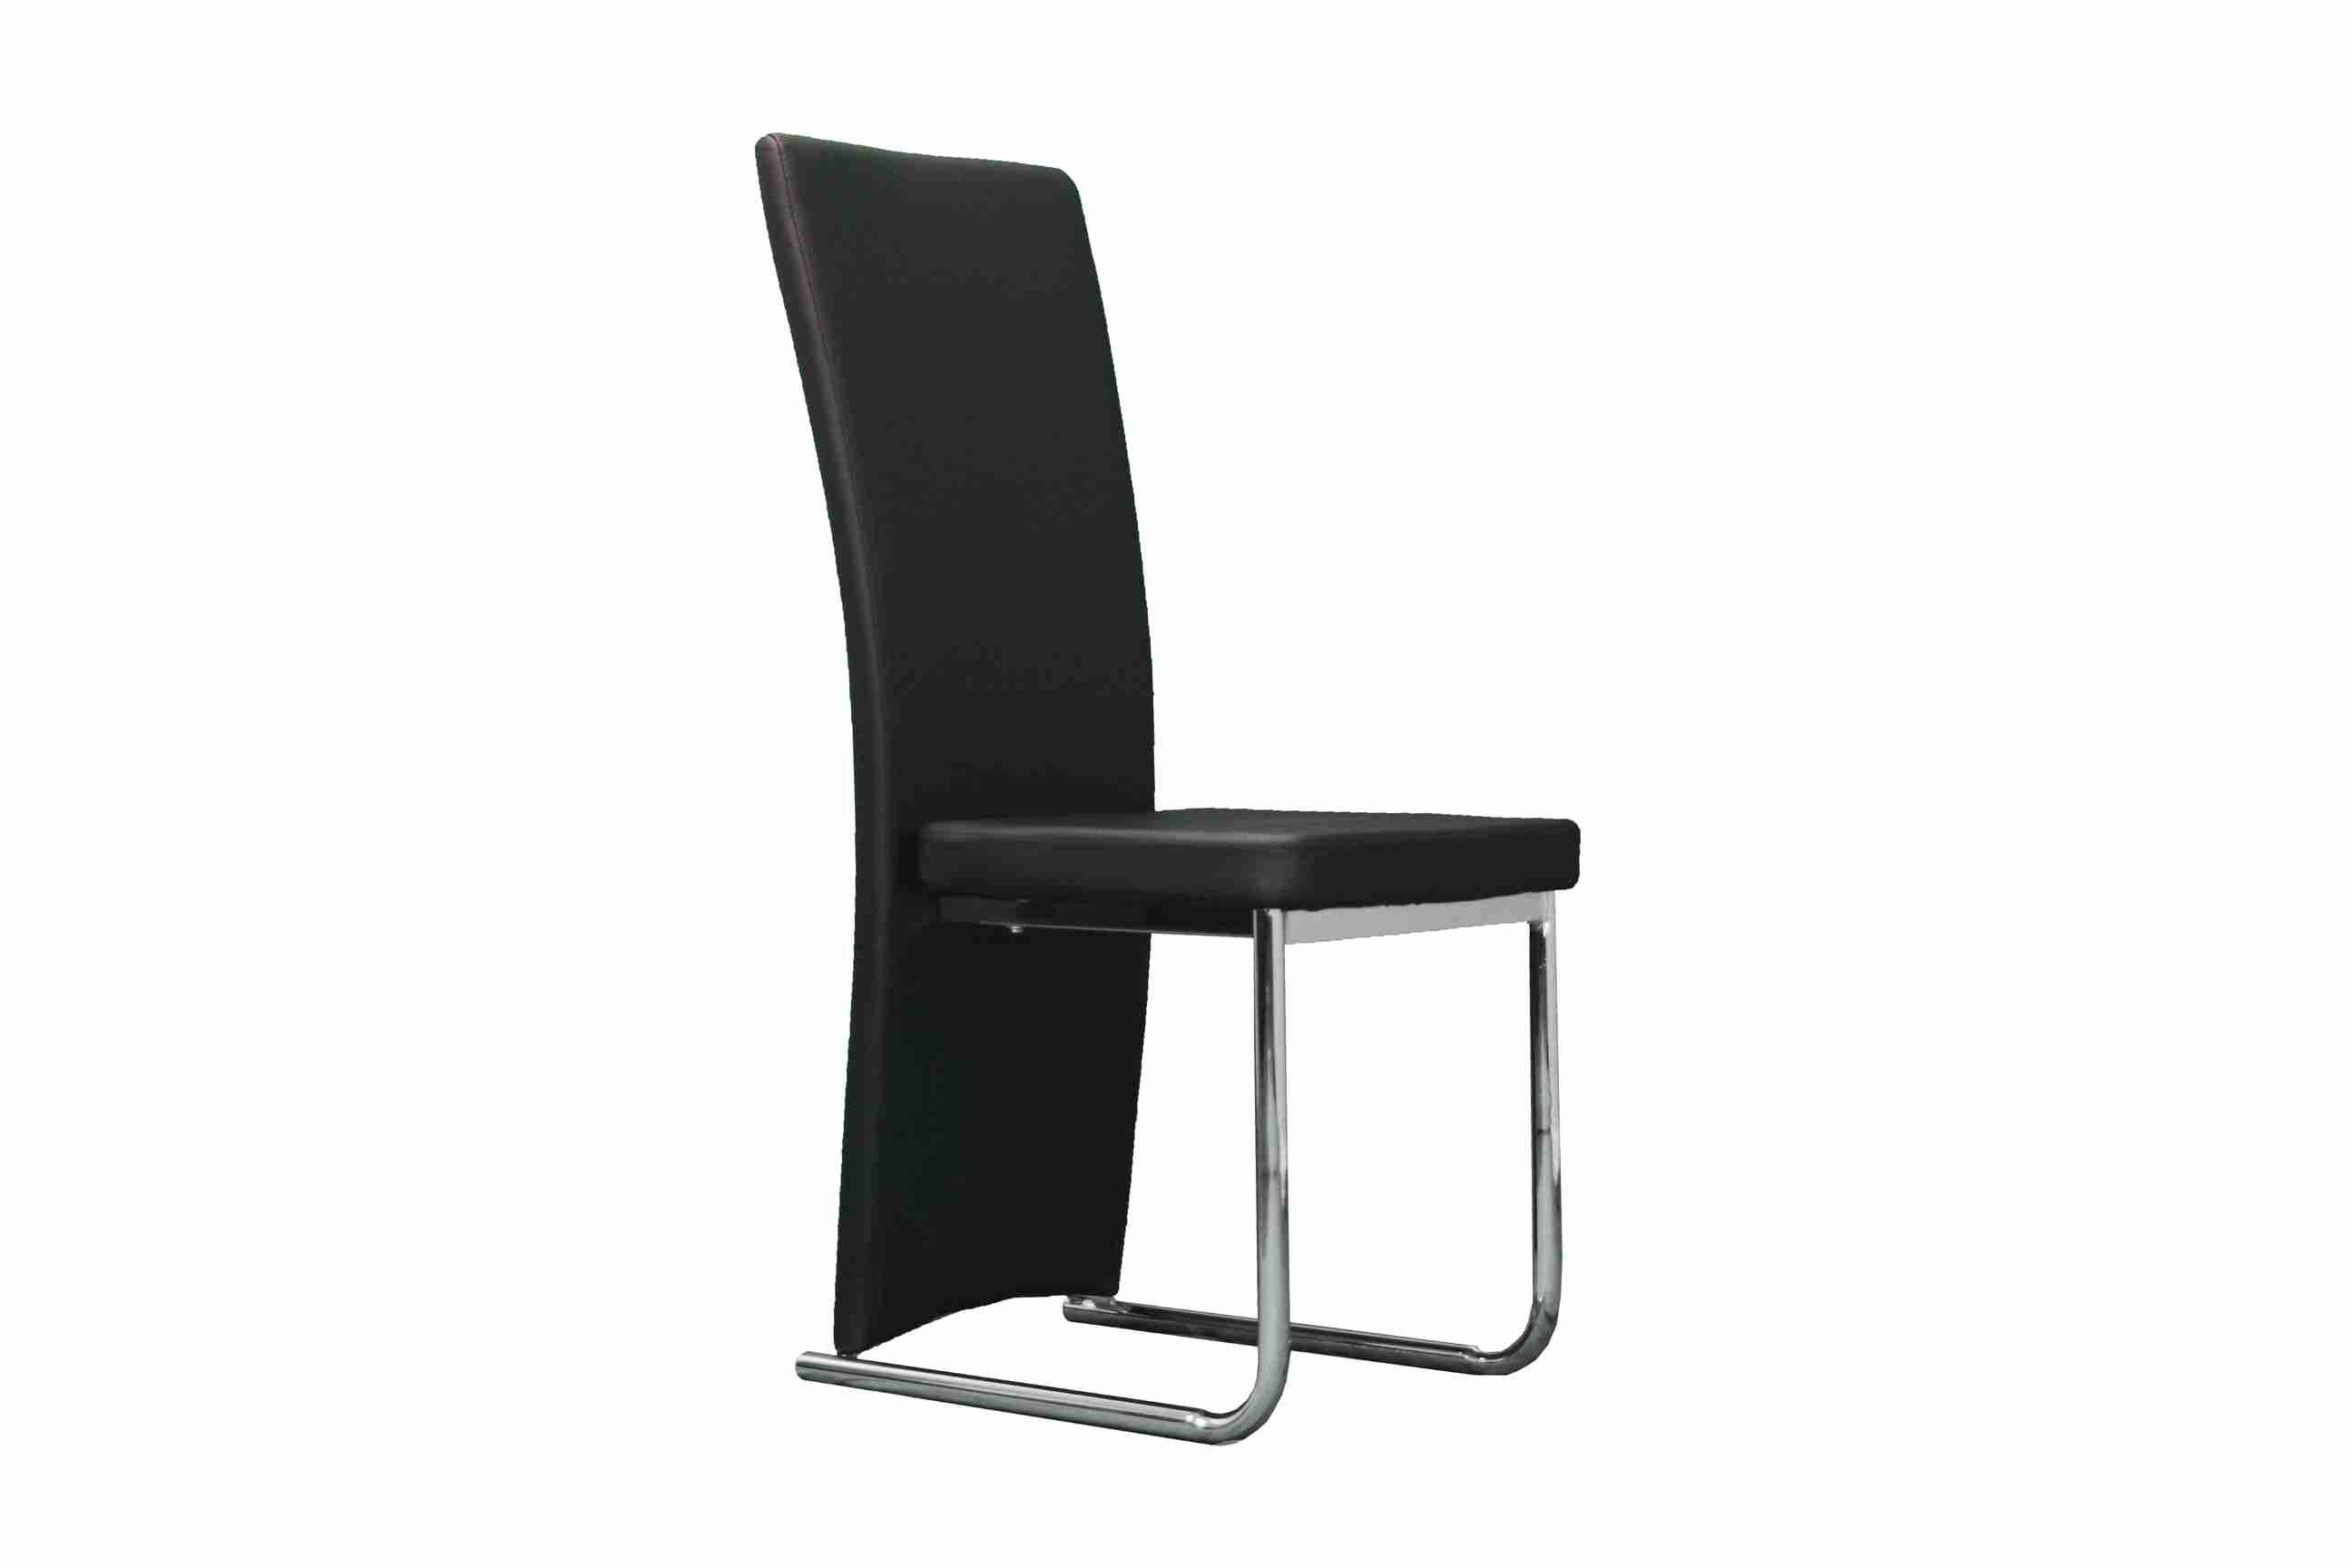 Side Chair PU Leather in Black (Set of 2) -UH-957-BLK